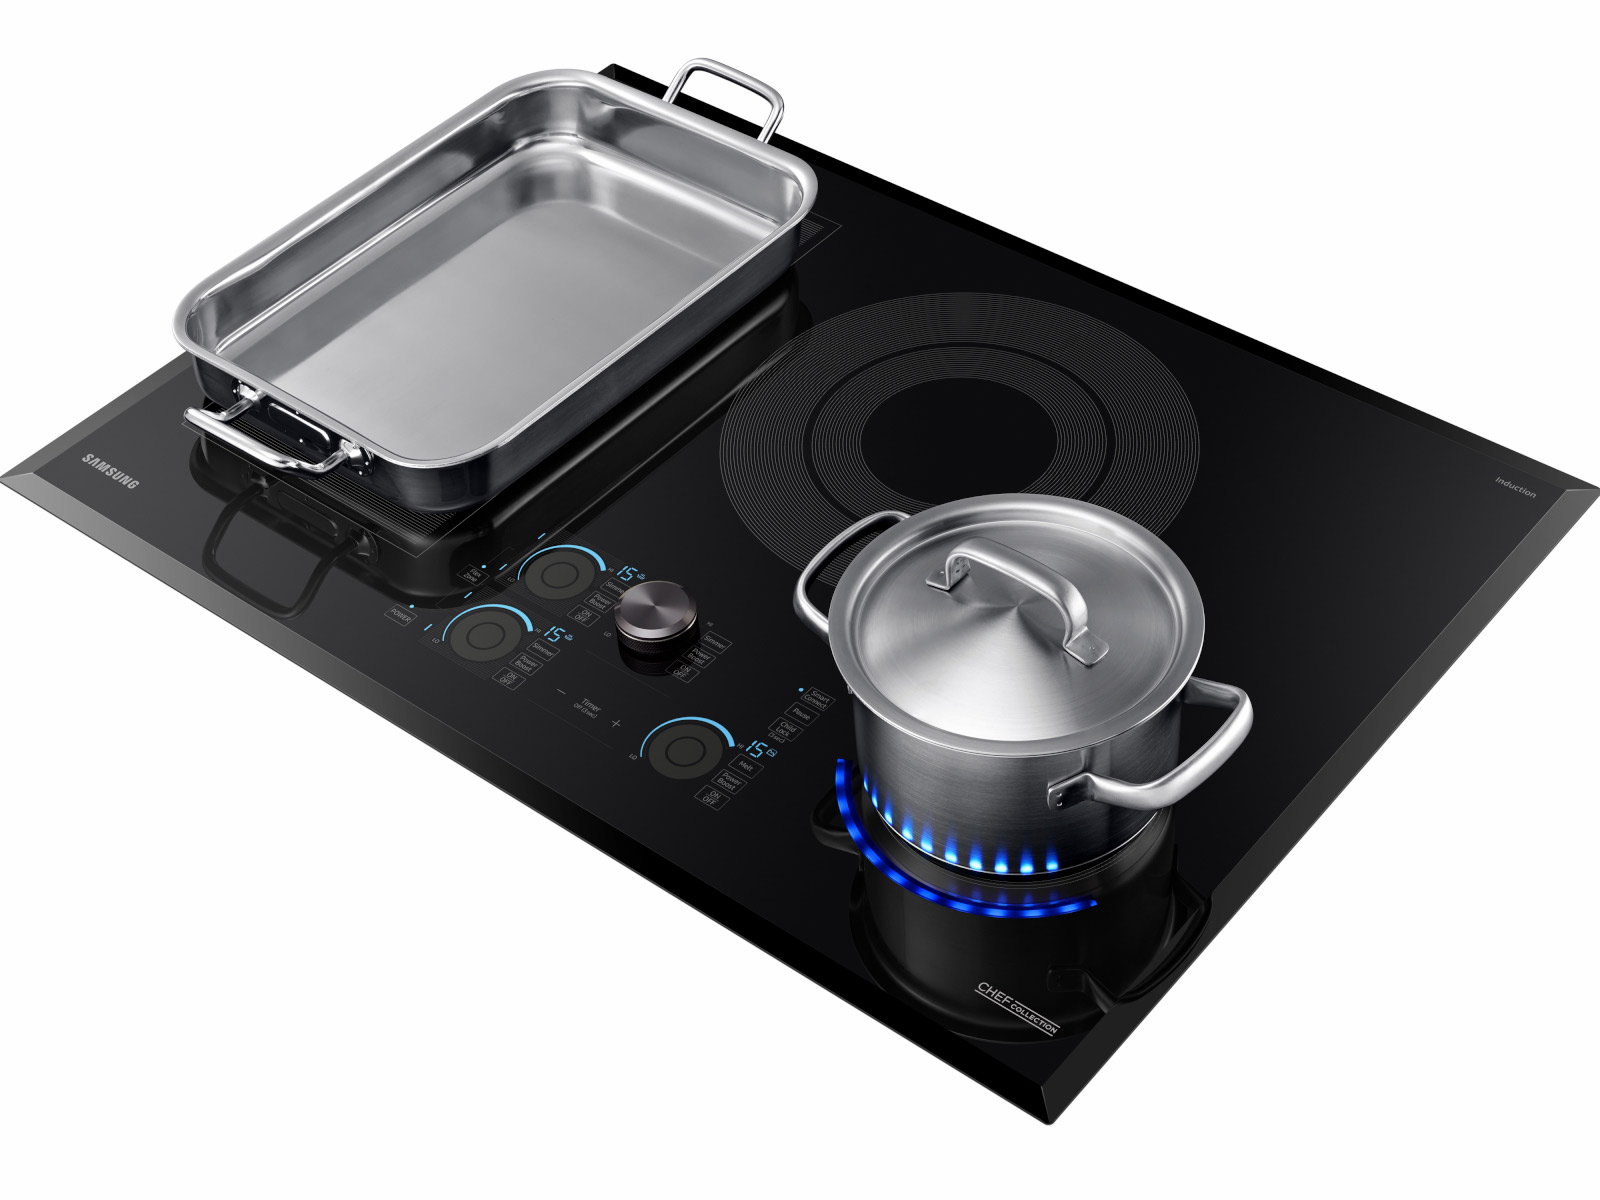 30 inch Chef Collection Induction Cooktop in Black Cooktop - NZ30M9880UB/AA